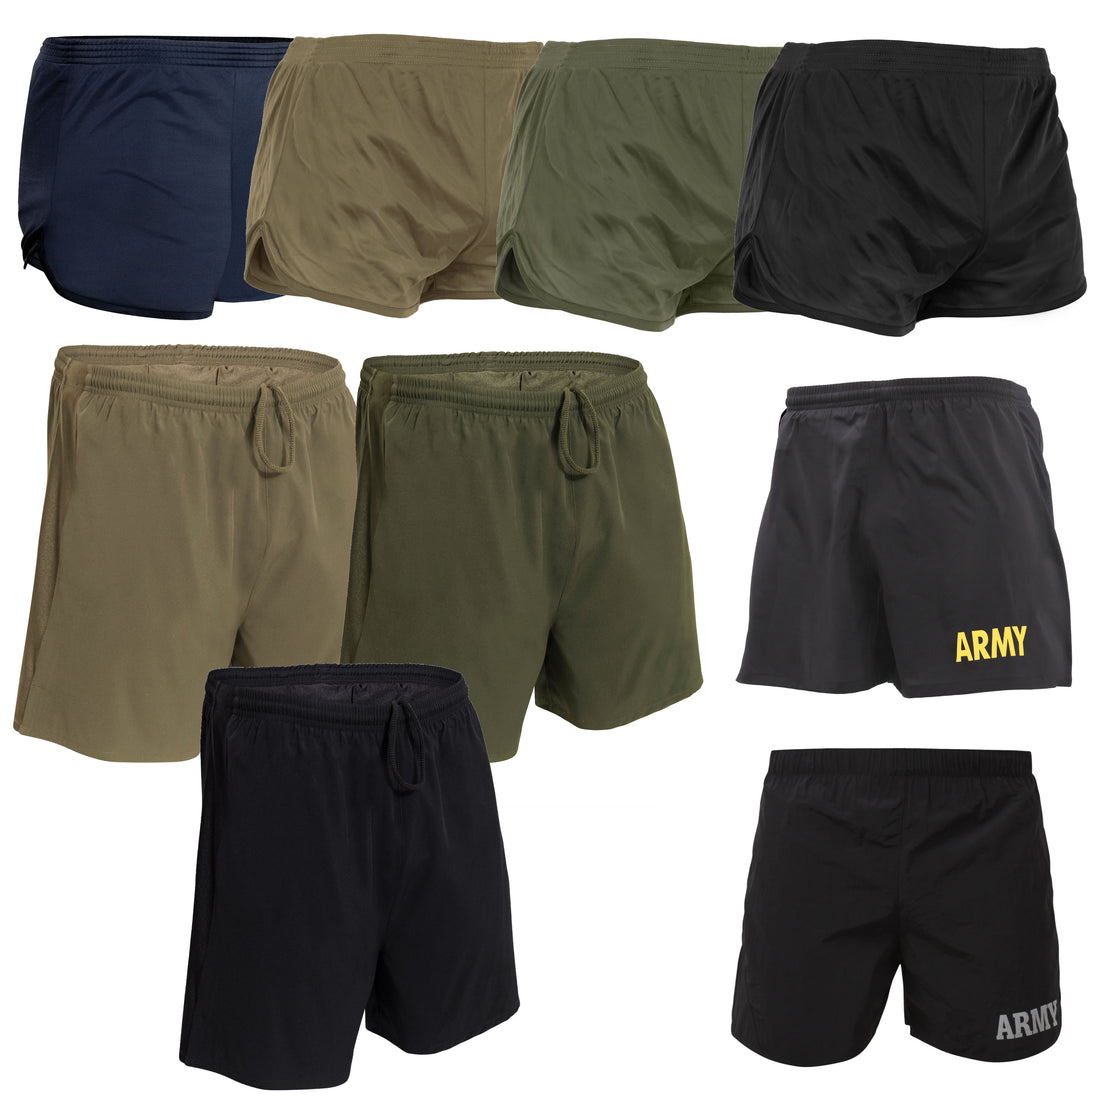 Athletic Shorts Just In Time For Summer!